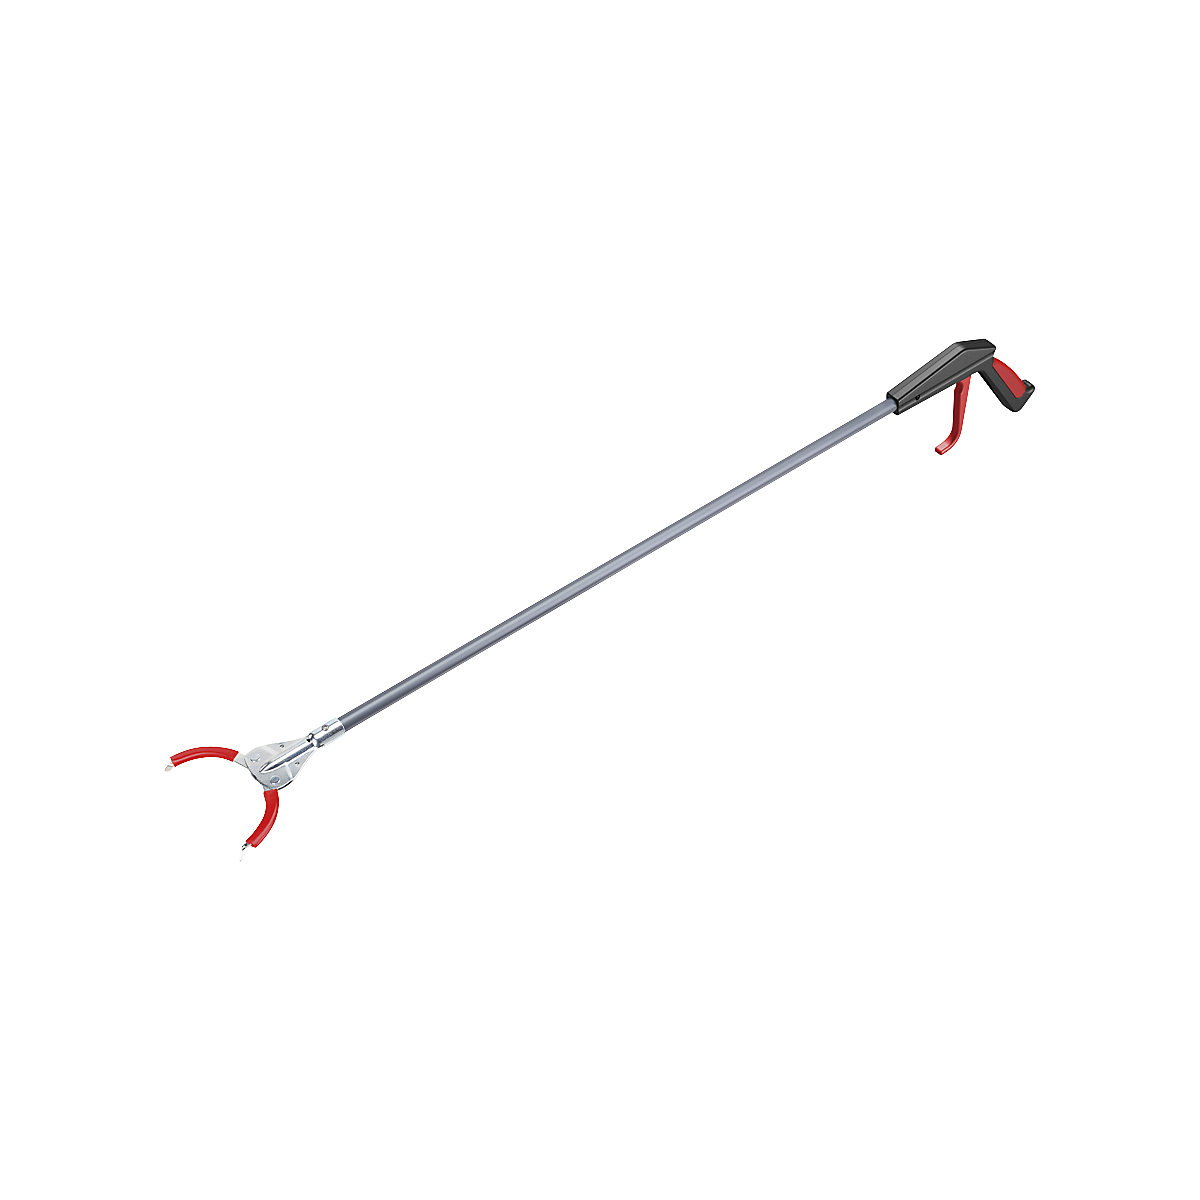 Waste collection device – FLORA, grabber with steel claws, pack of 2, overall length 900 mm-5